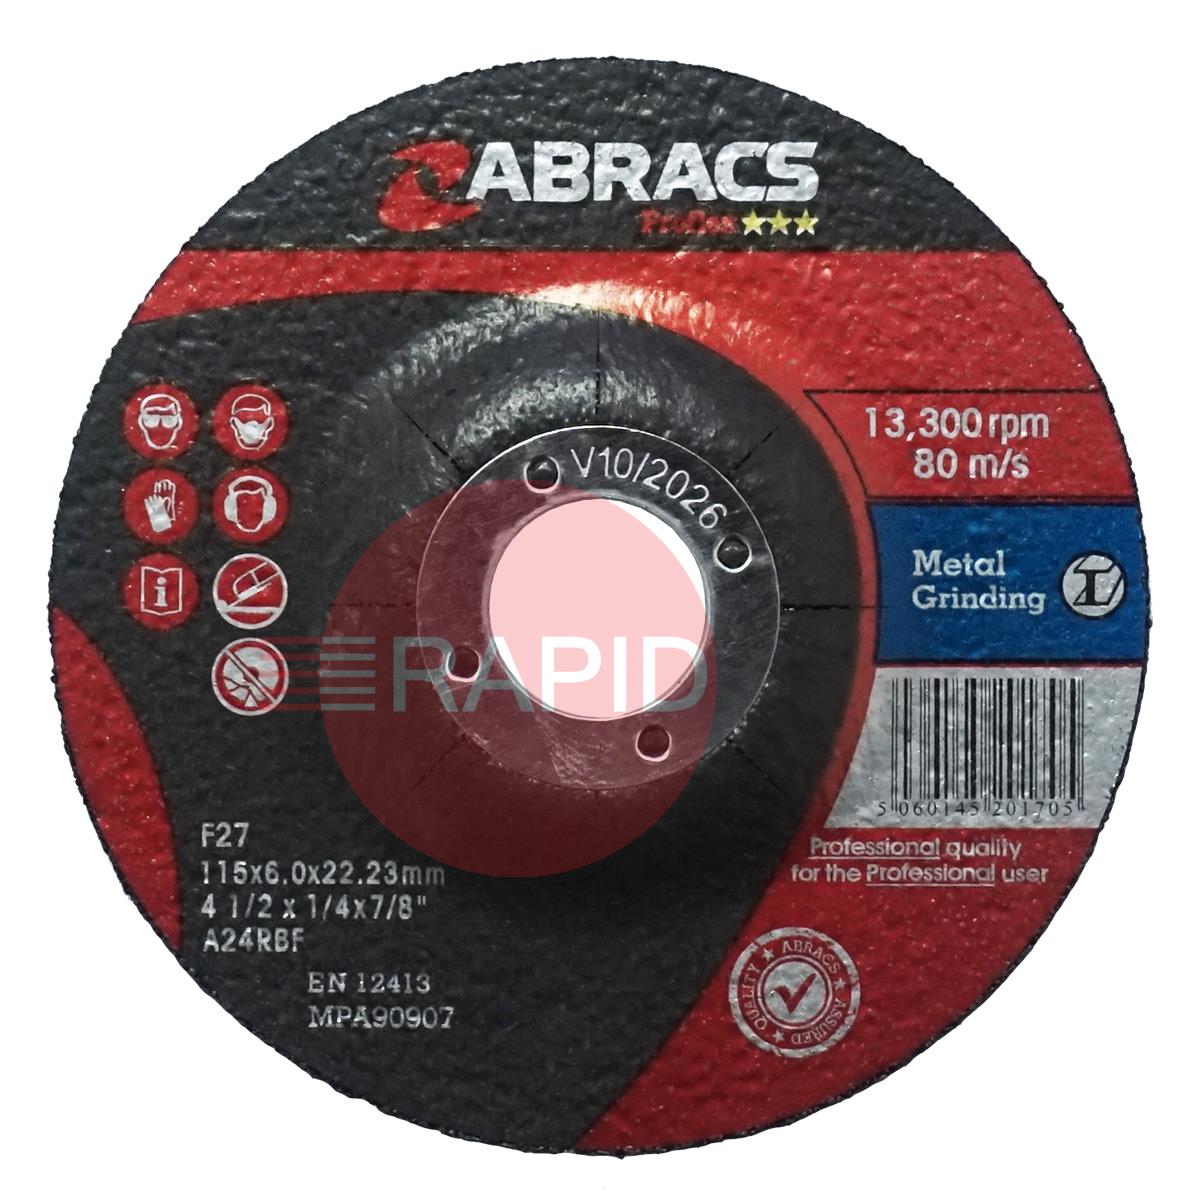 PF11560DM  Abracs Proflex 115mm (4.5) Depressed Centre Grinding Disc 6mm Thick. Grade A24RBF For Metal.